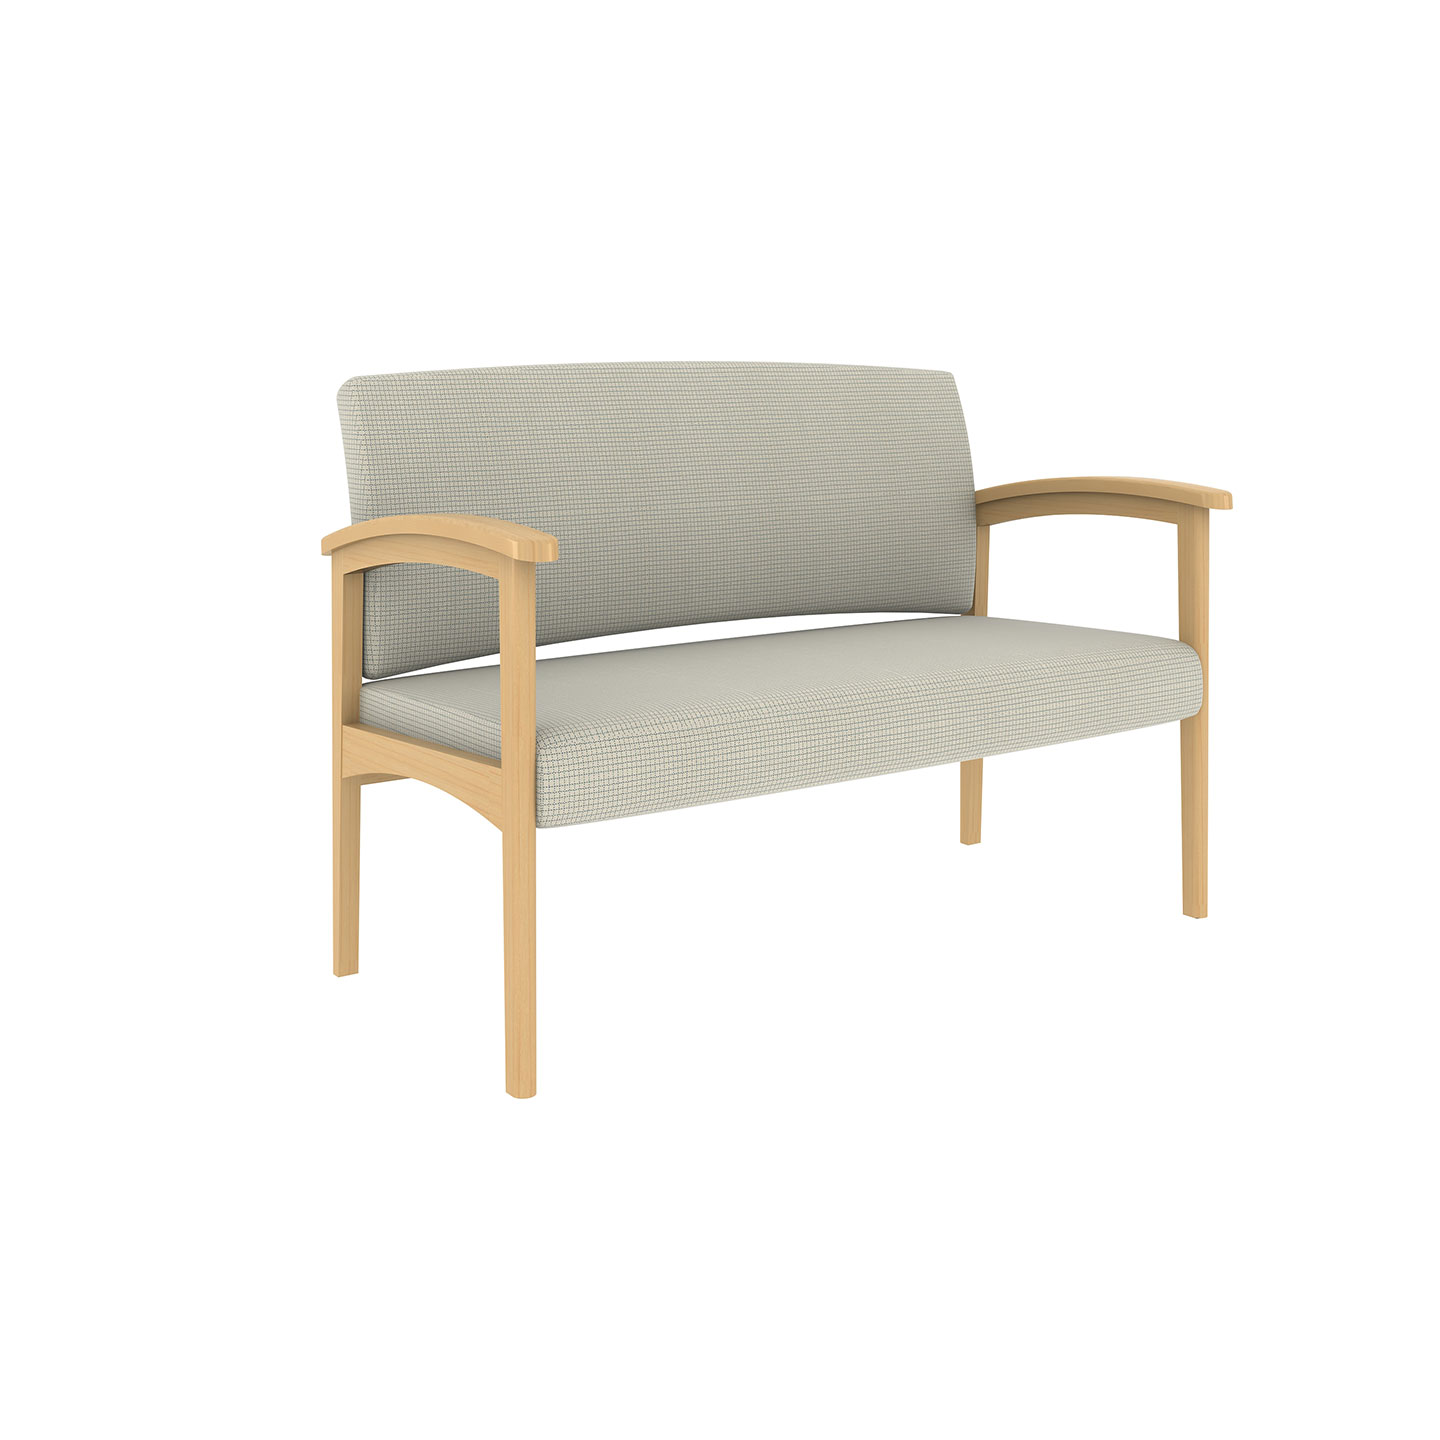 A large sized Haworth Conover Bariatric chair in light green and light wood combination